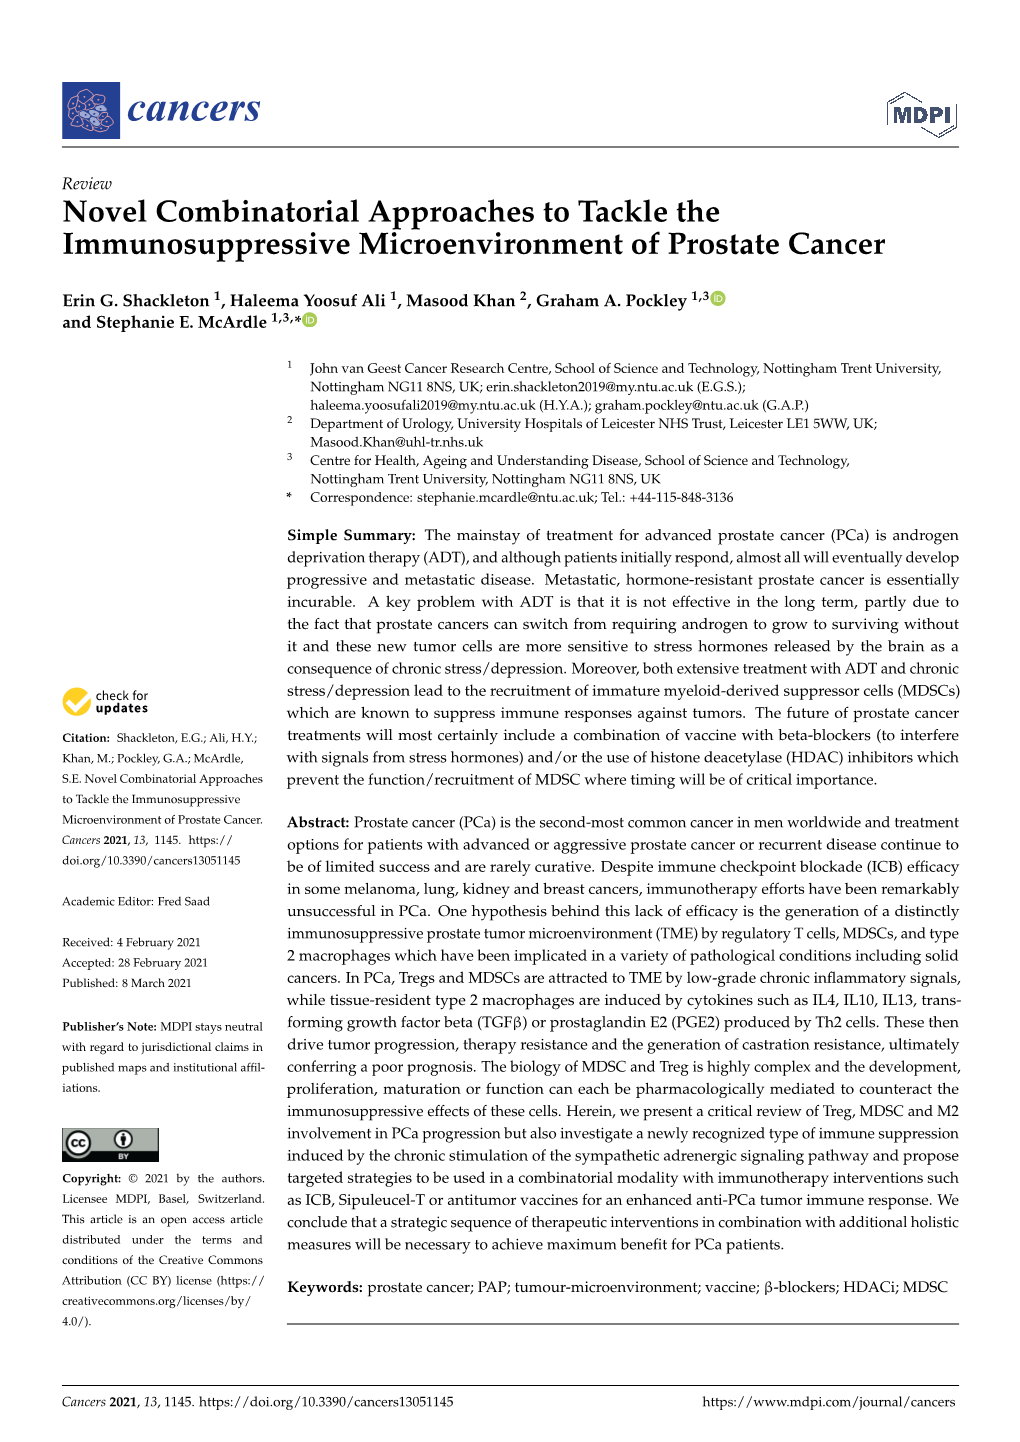 Novel Combinatorial Approaches to Tackle the Immunosuppressive Microenvironment of Prostate Cancer